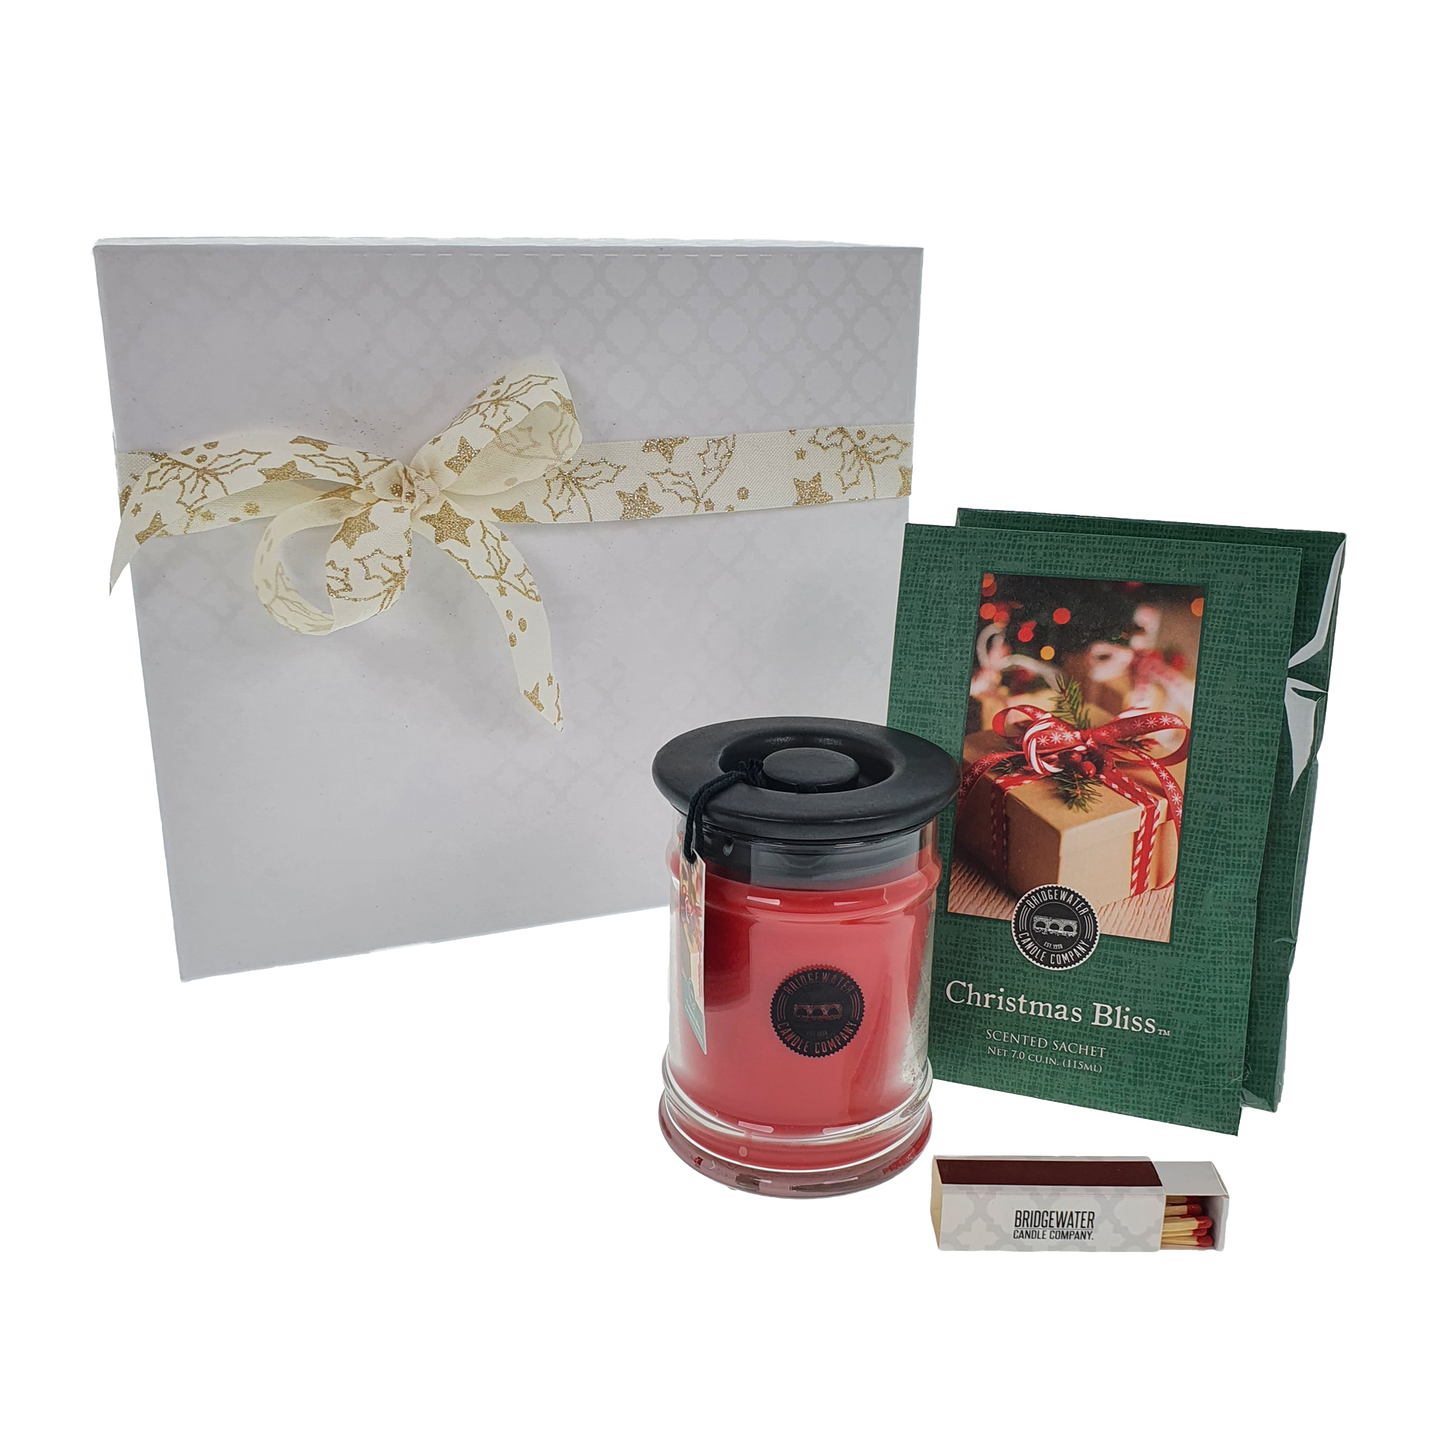 Bridgewater Christmas Bliss - luxury gift set - Christmas scent - scented candle with 2 sachets and matches